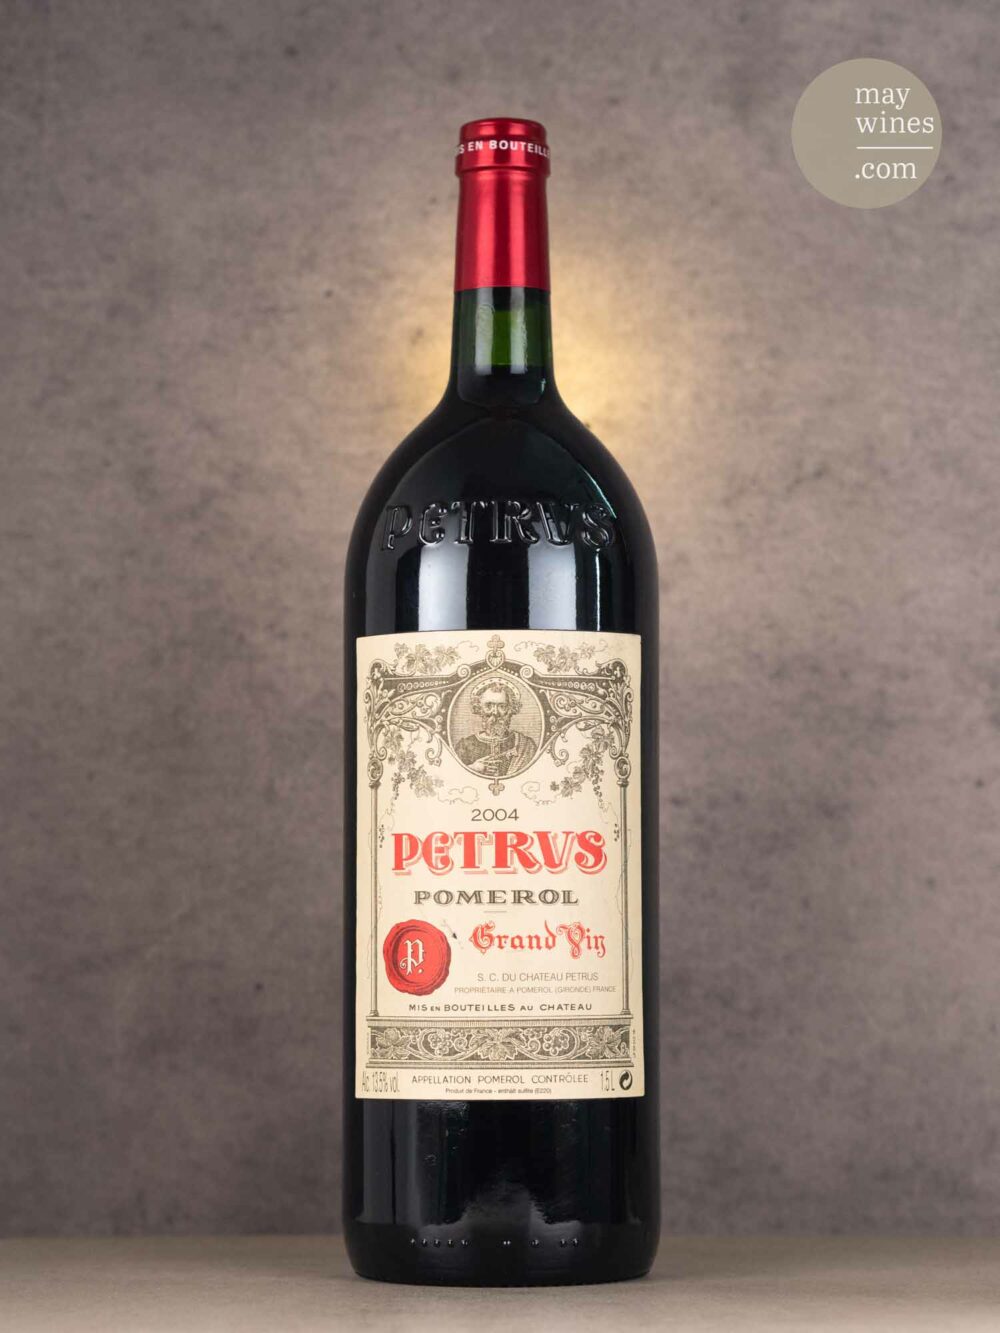 May Wines – Rotwein – 2004 Petrus